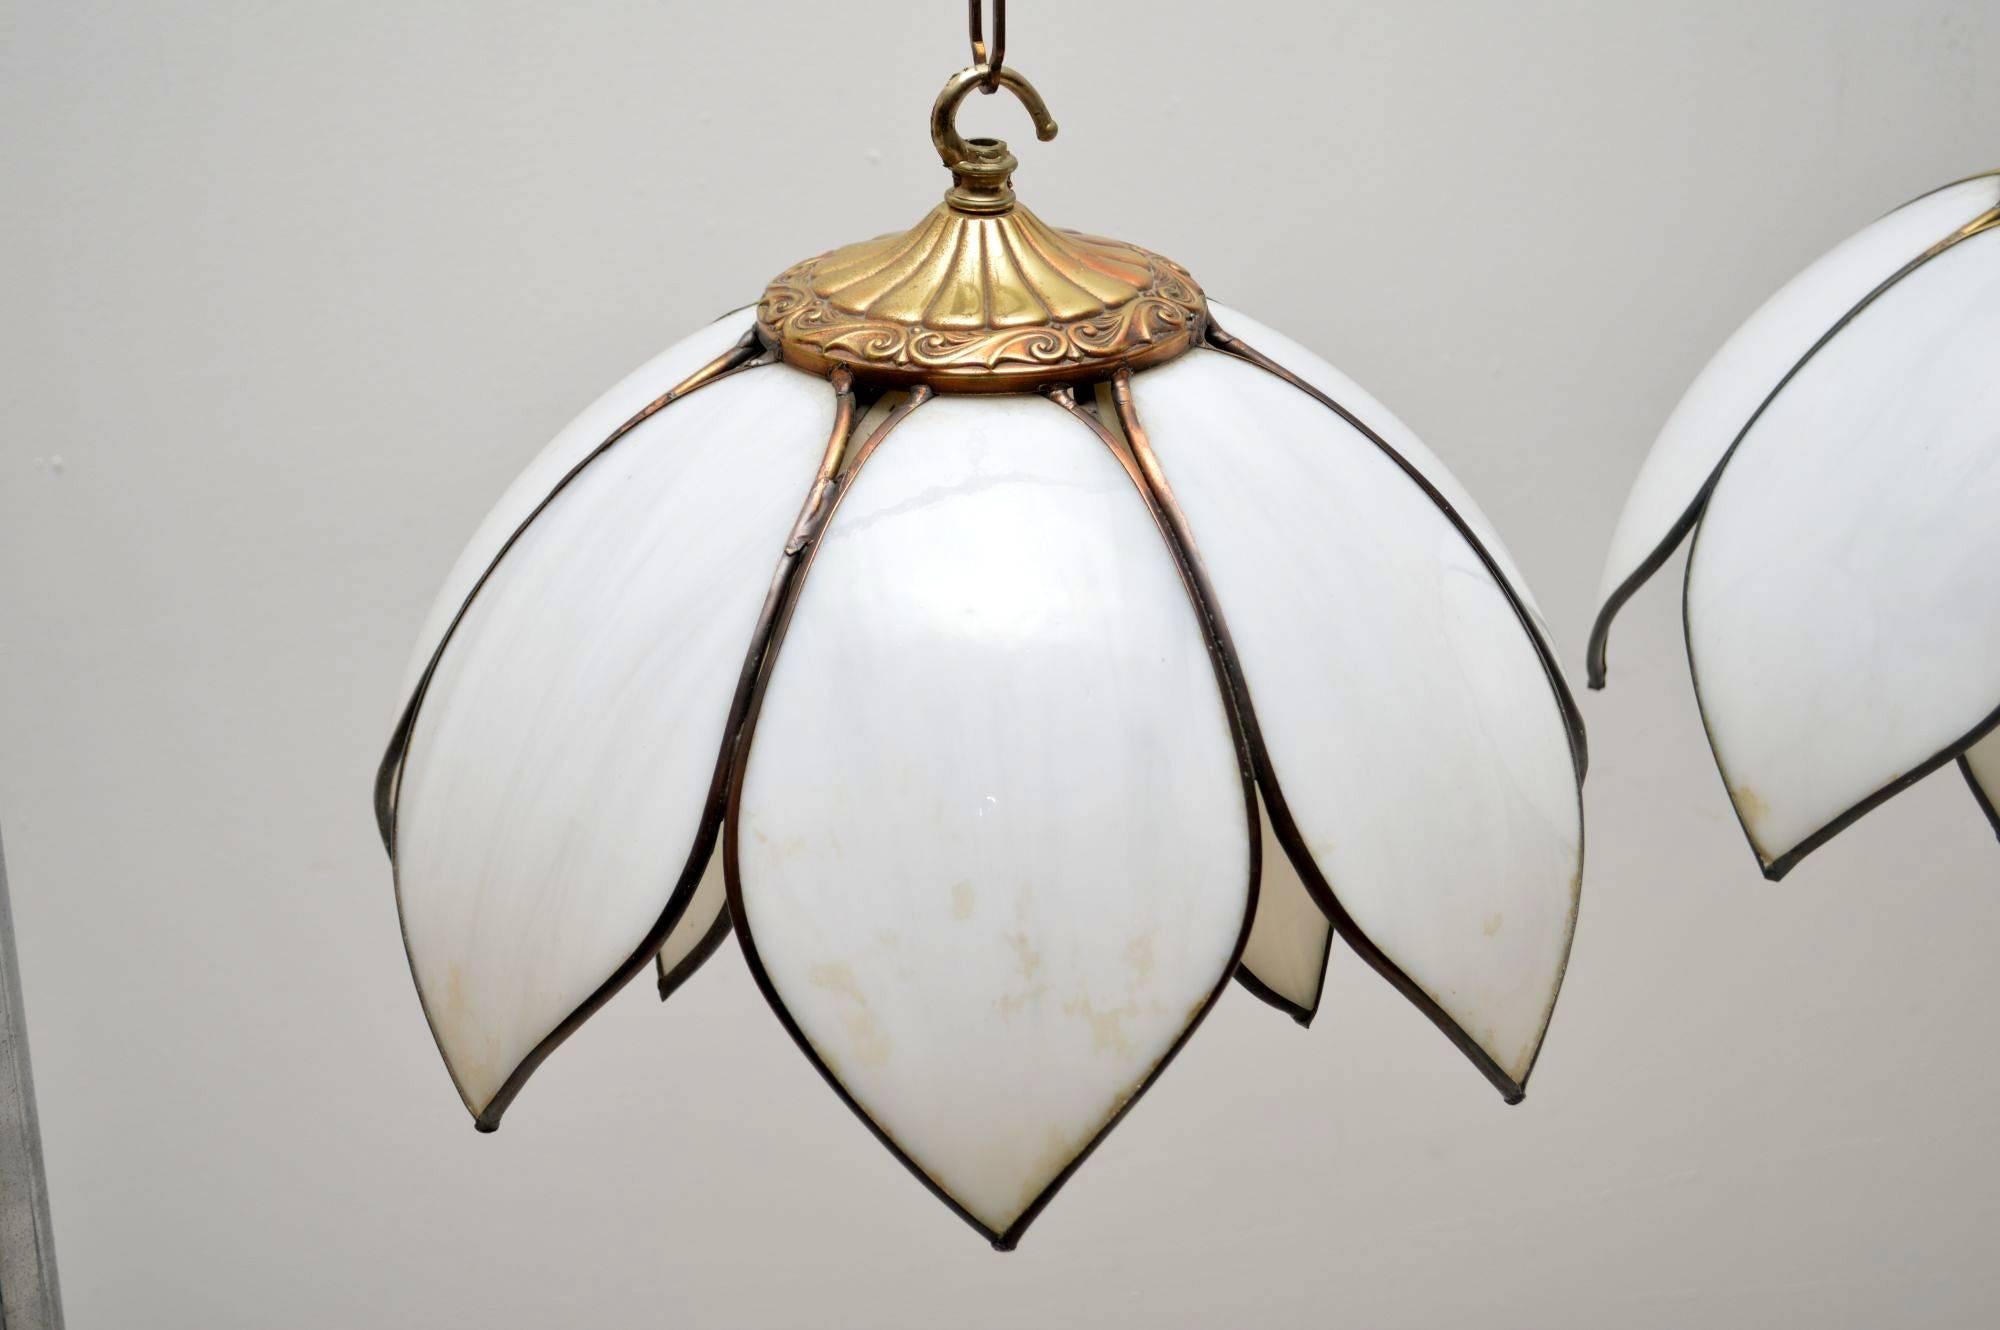 A beautifully made pair of vintage pendant lamps, these were made in London in the 1960s. They are of amazing quality, we’re not completely sure of the material but it looks like a type of white resin and gilt metal. The condition is excellent for